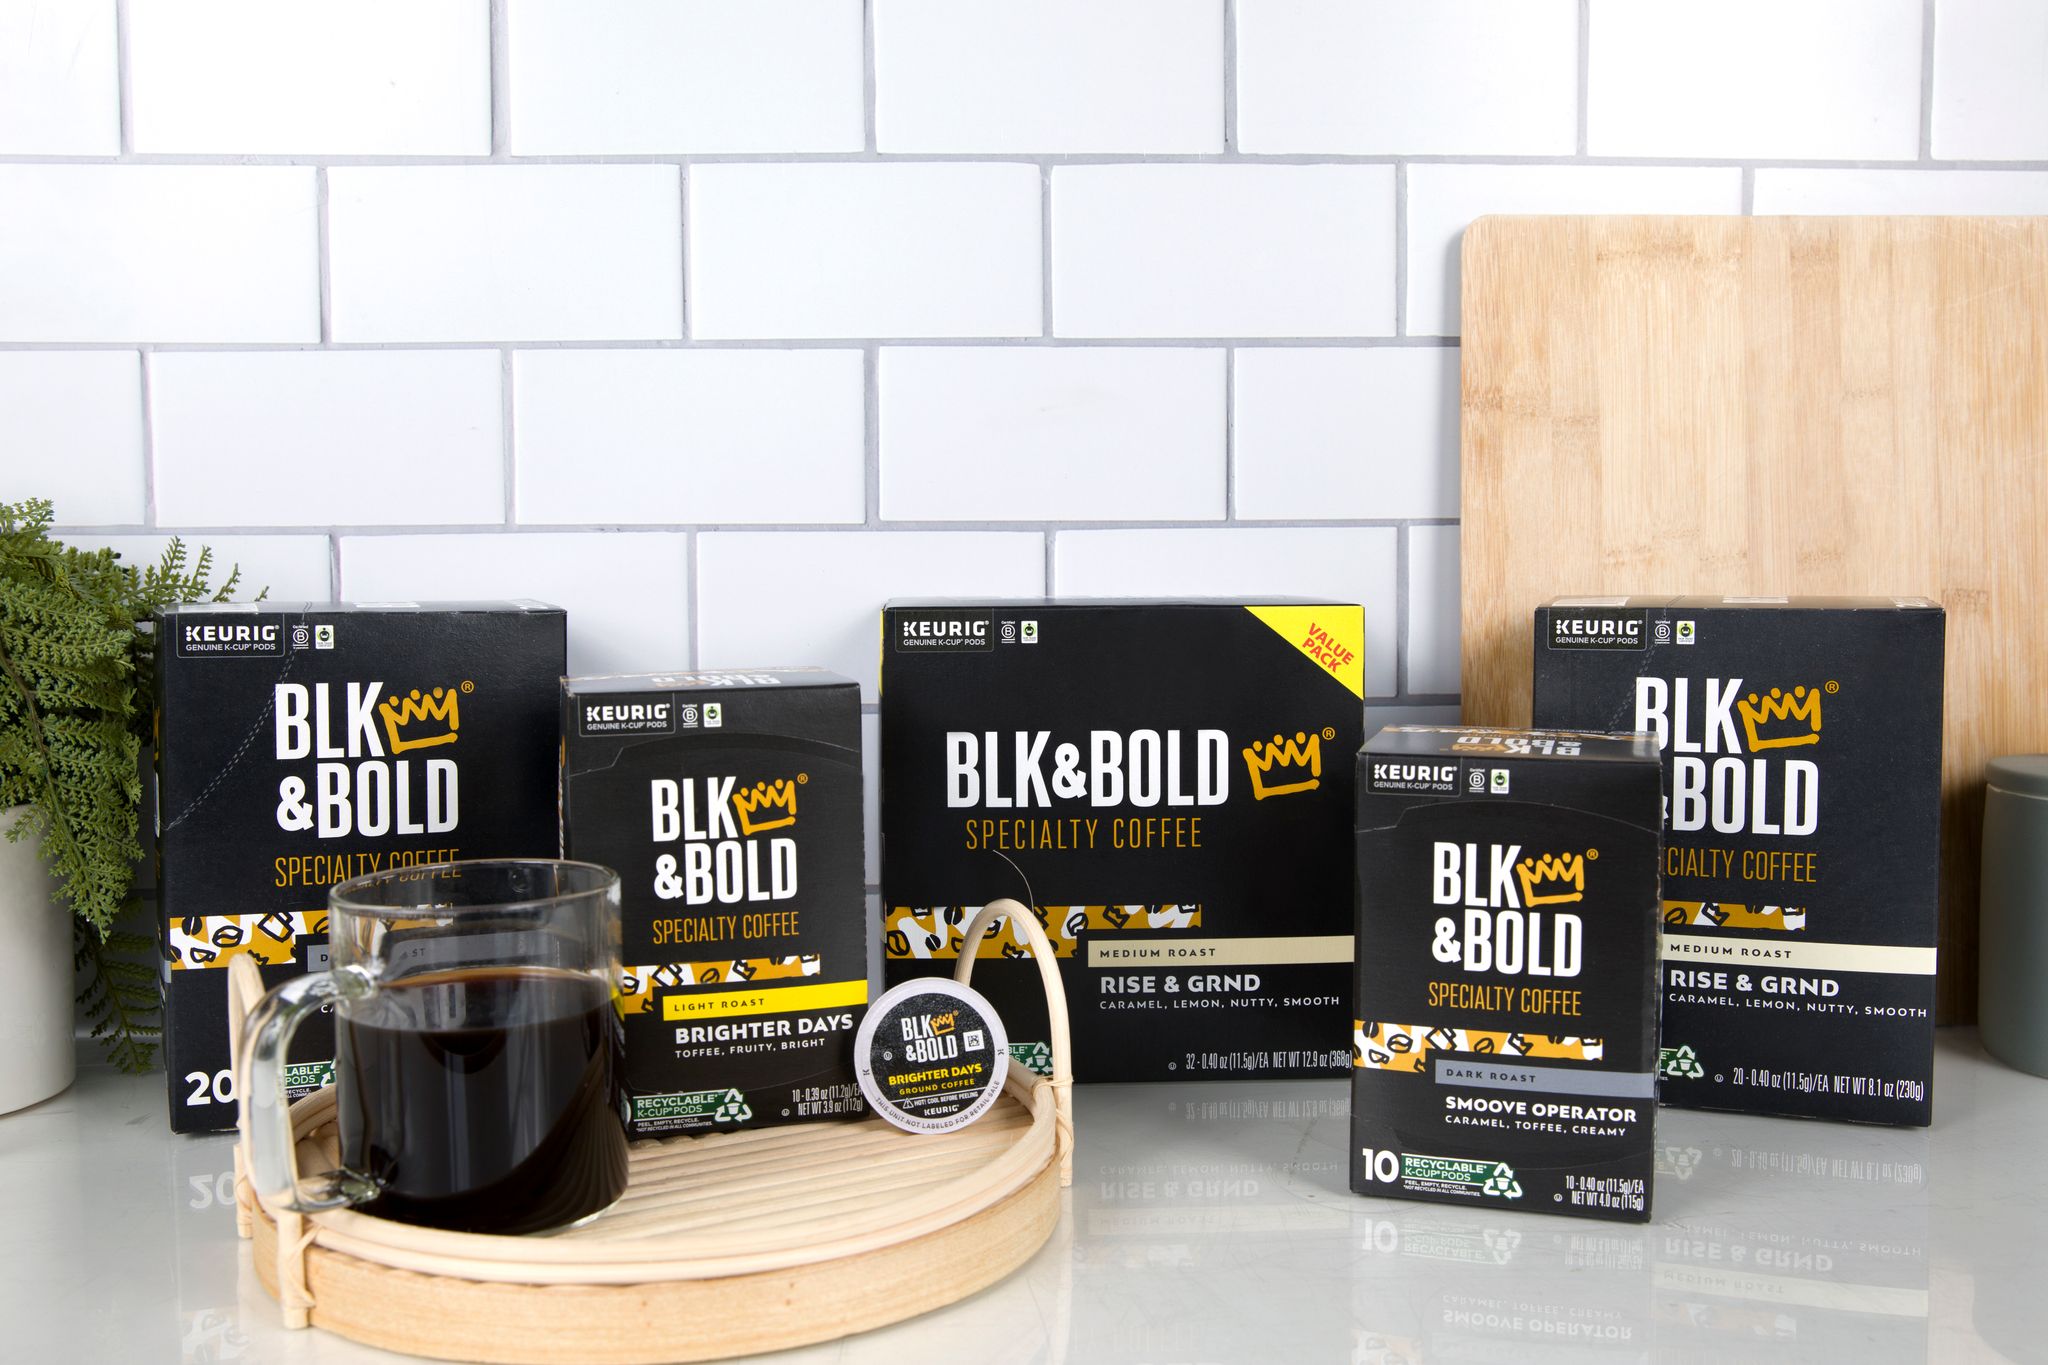 BLK & Bold and Keurig Announces Our New Keurig K-Cups.